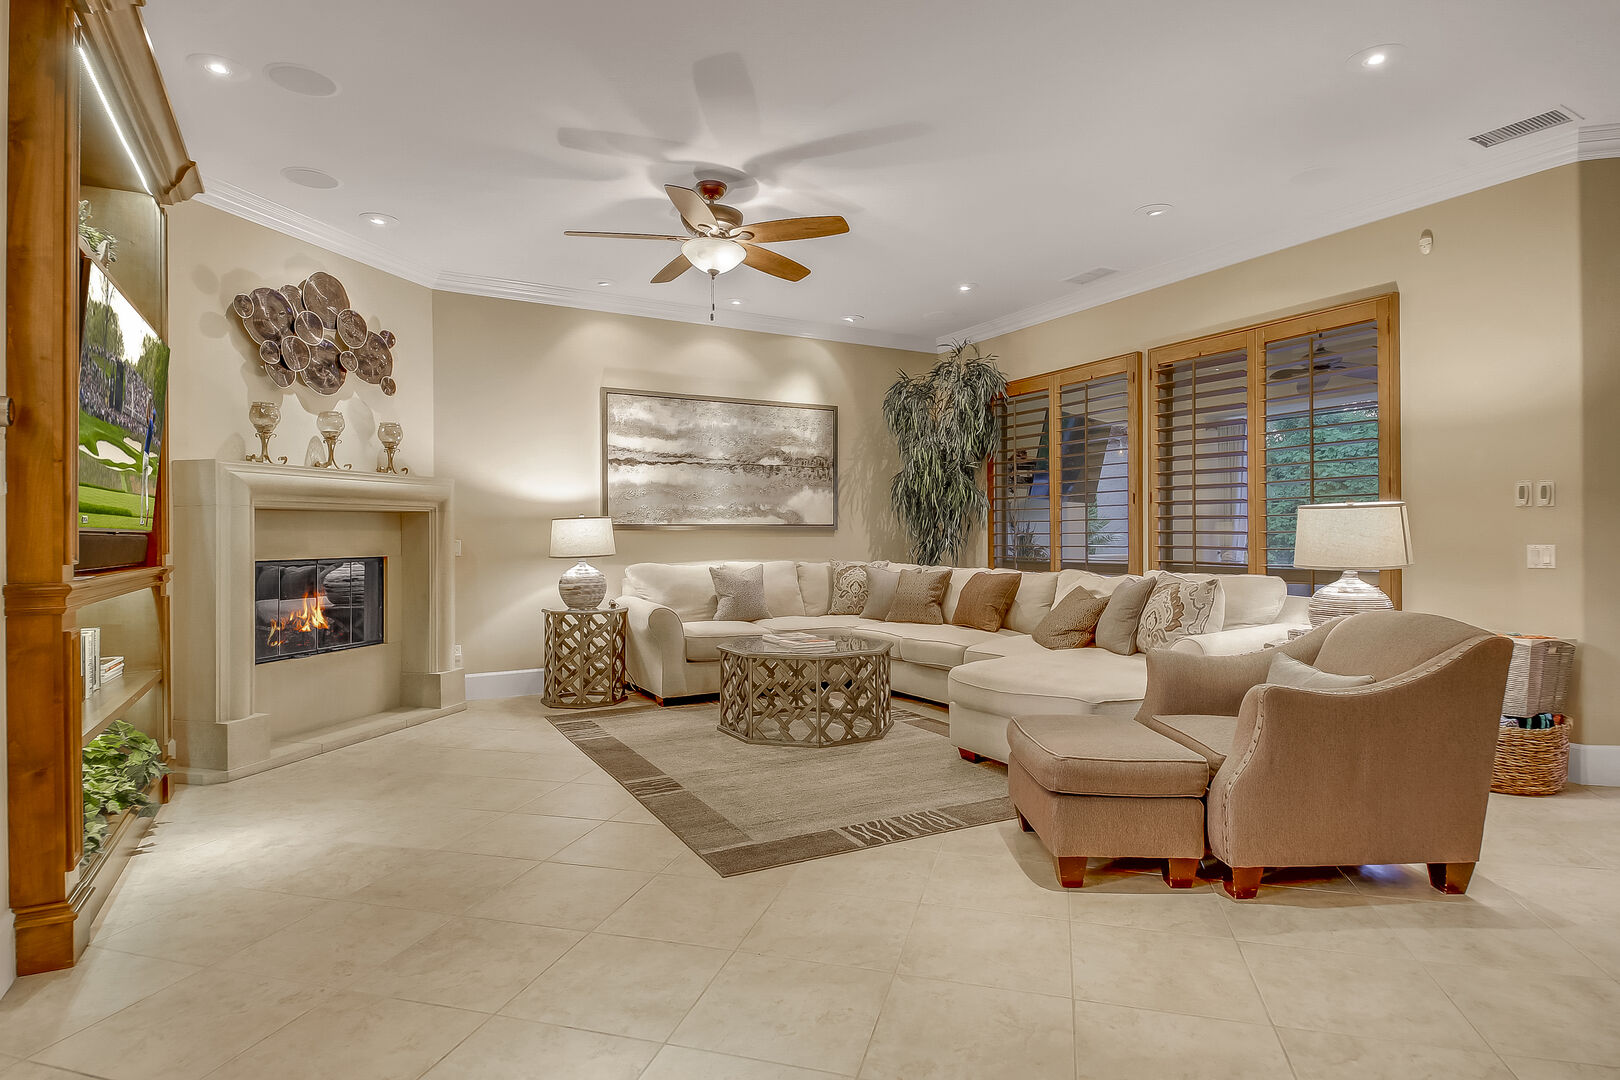 There is plenty of room in the living room to lounge in front of a 65-inch Samsung 4K Smart television and natural gas fireplace with comfort.